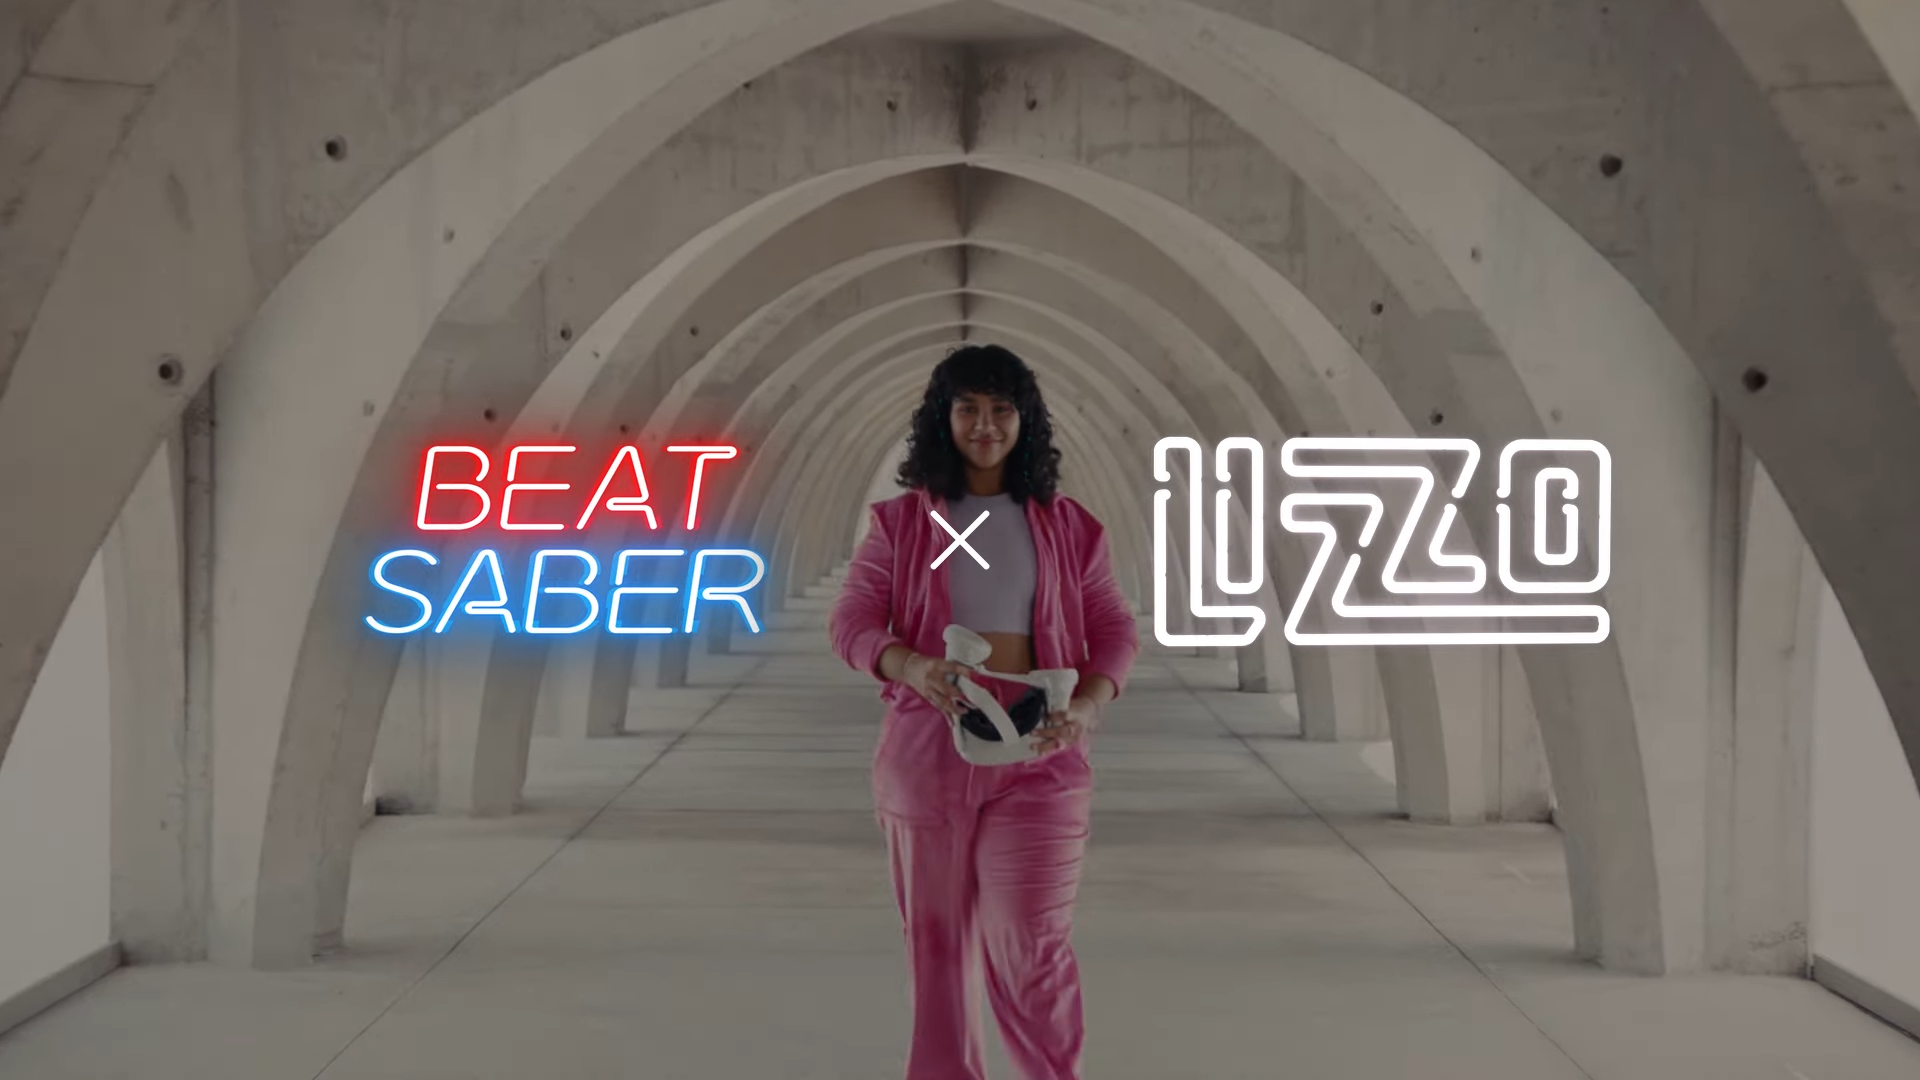 Beat Saber x Lizzo collaboration screenshot from trailer